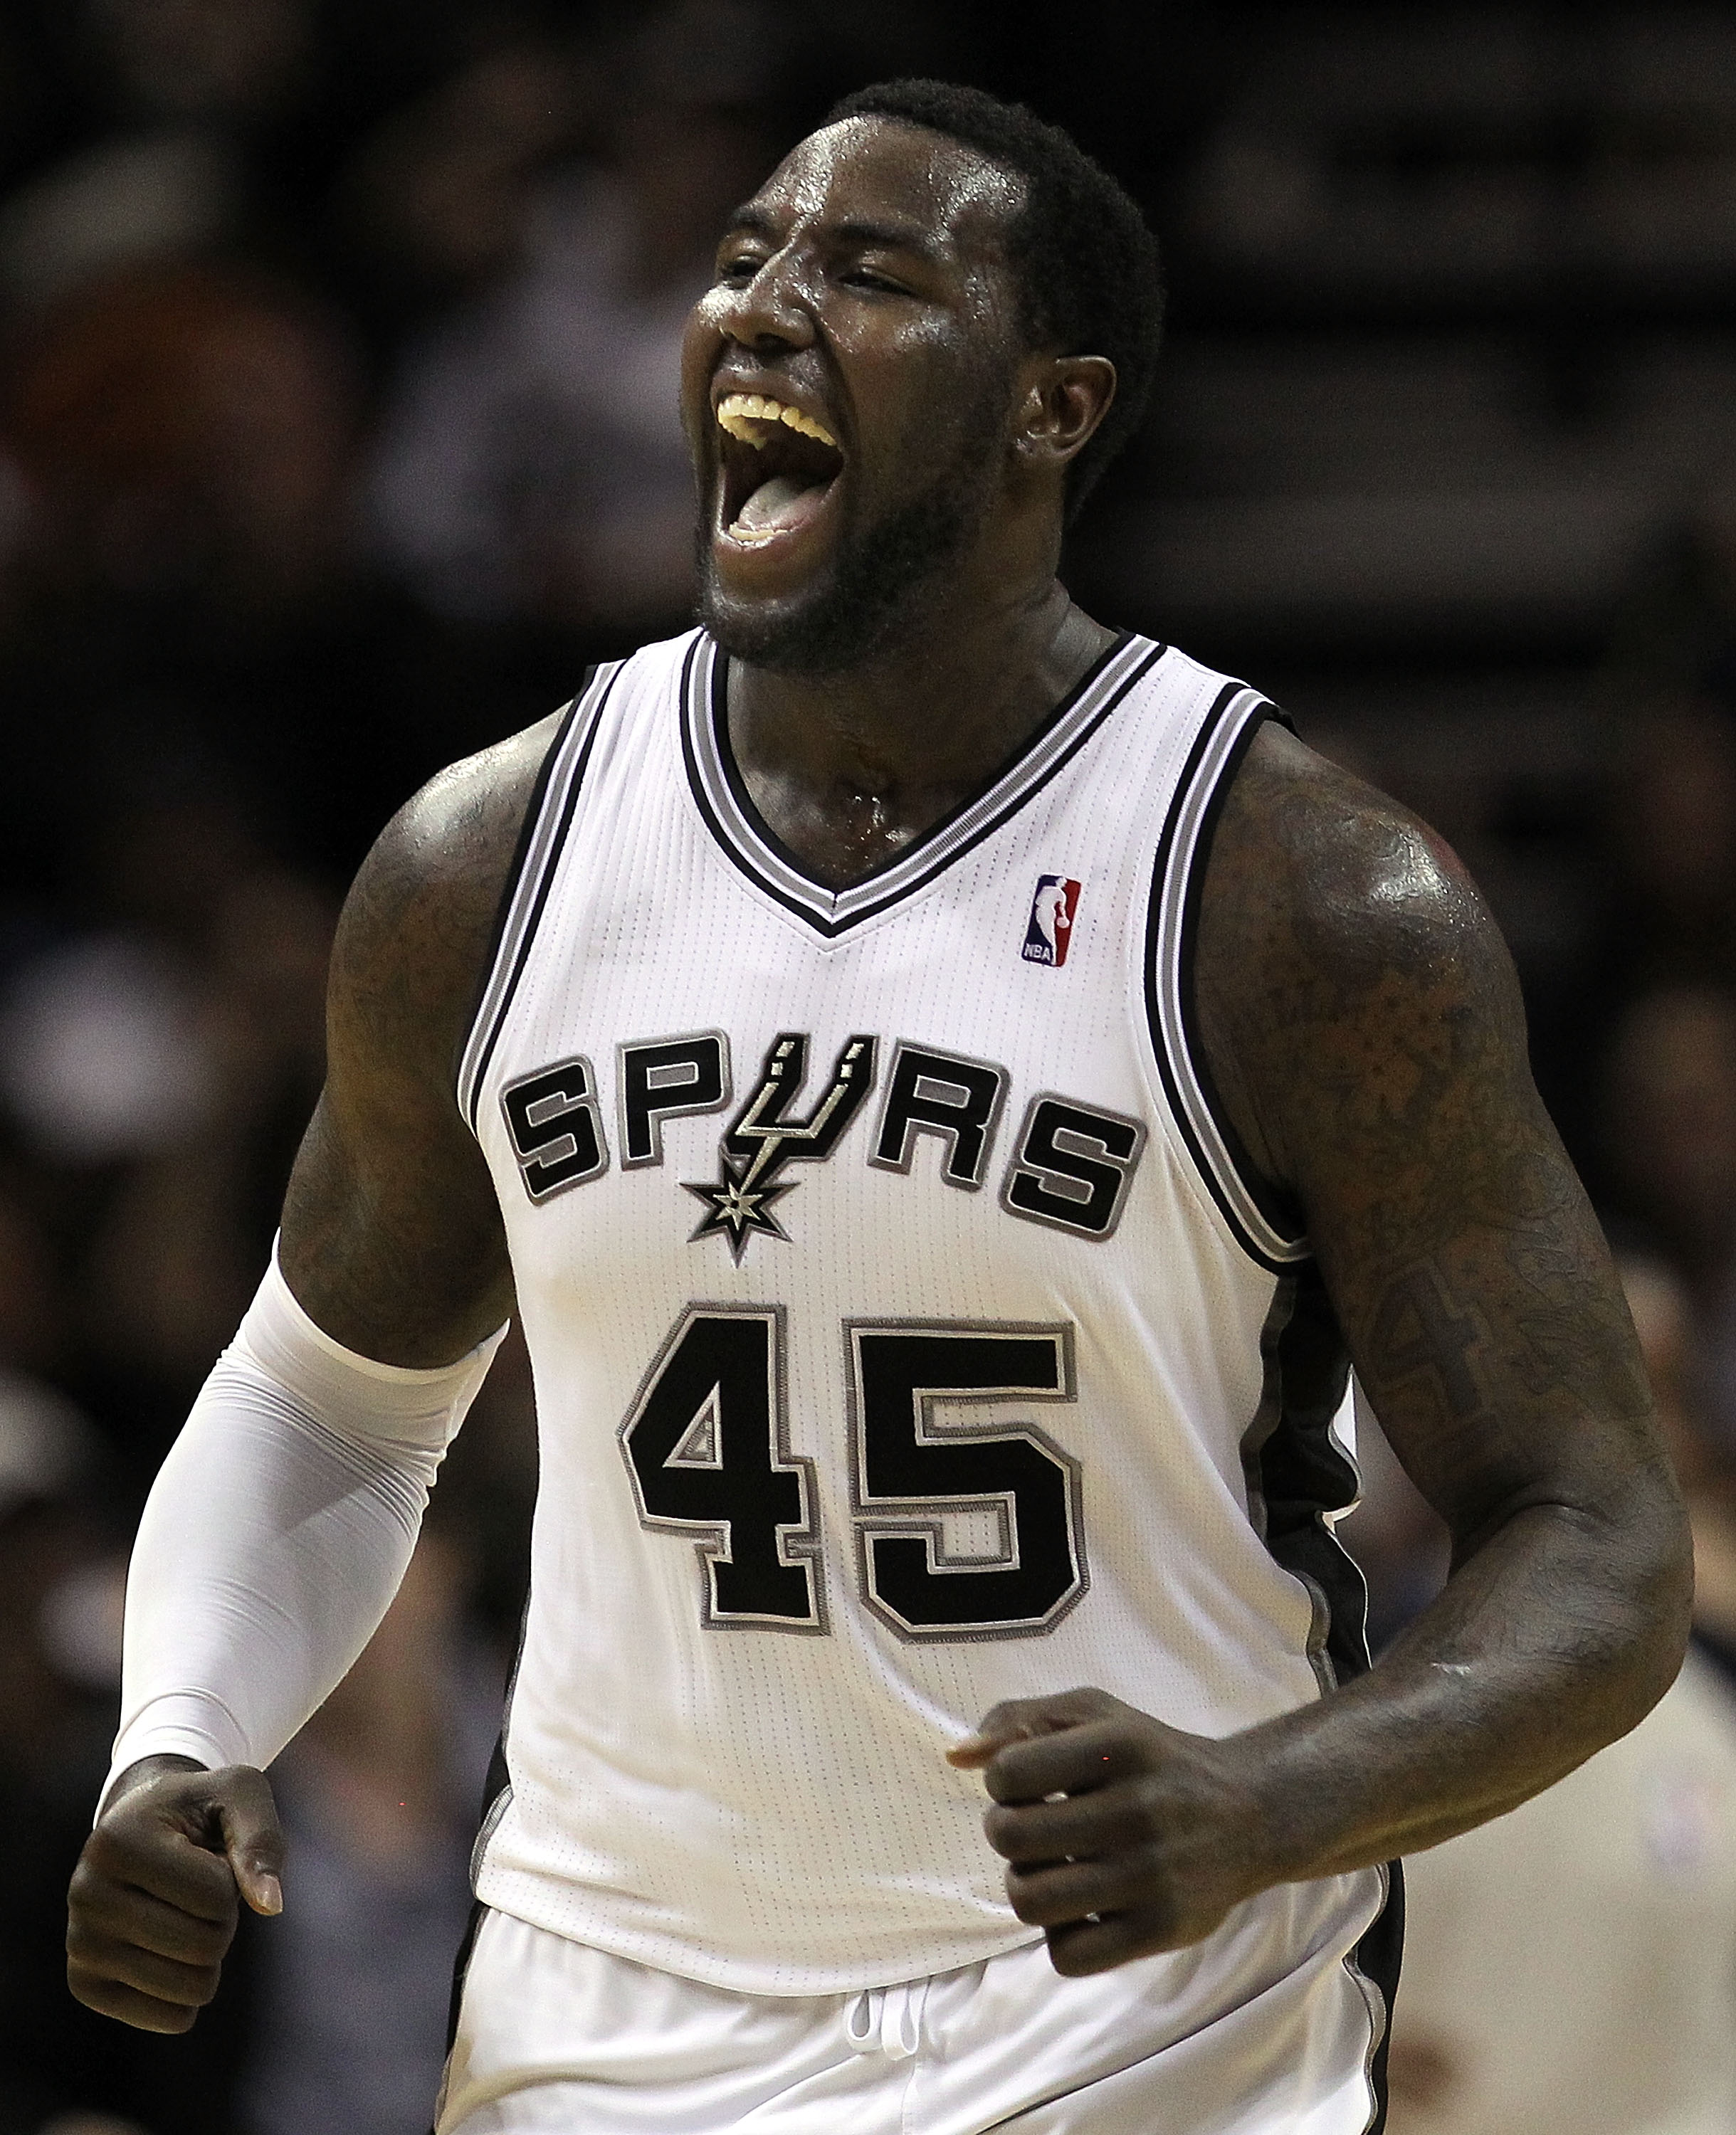 SAN ANTONIO, TX - DECEMBER 28:  Forward DeJuan Blair #45 of the San Antonio Spurs reacts during play against the Los Angeles Lakers at AT&T Center on December 28, 2010 in San Antonio, Texas.  NOTE TO USER: User expressly acknowledges and agrees that, by d